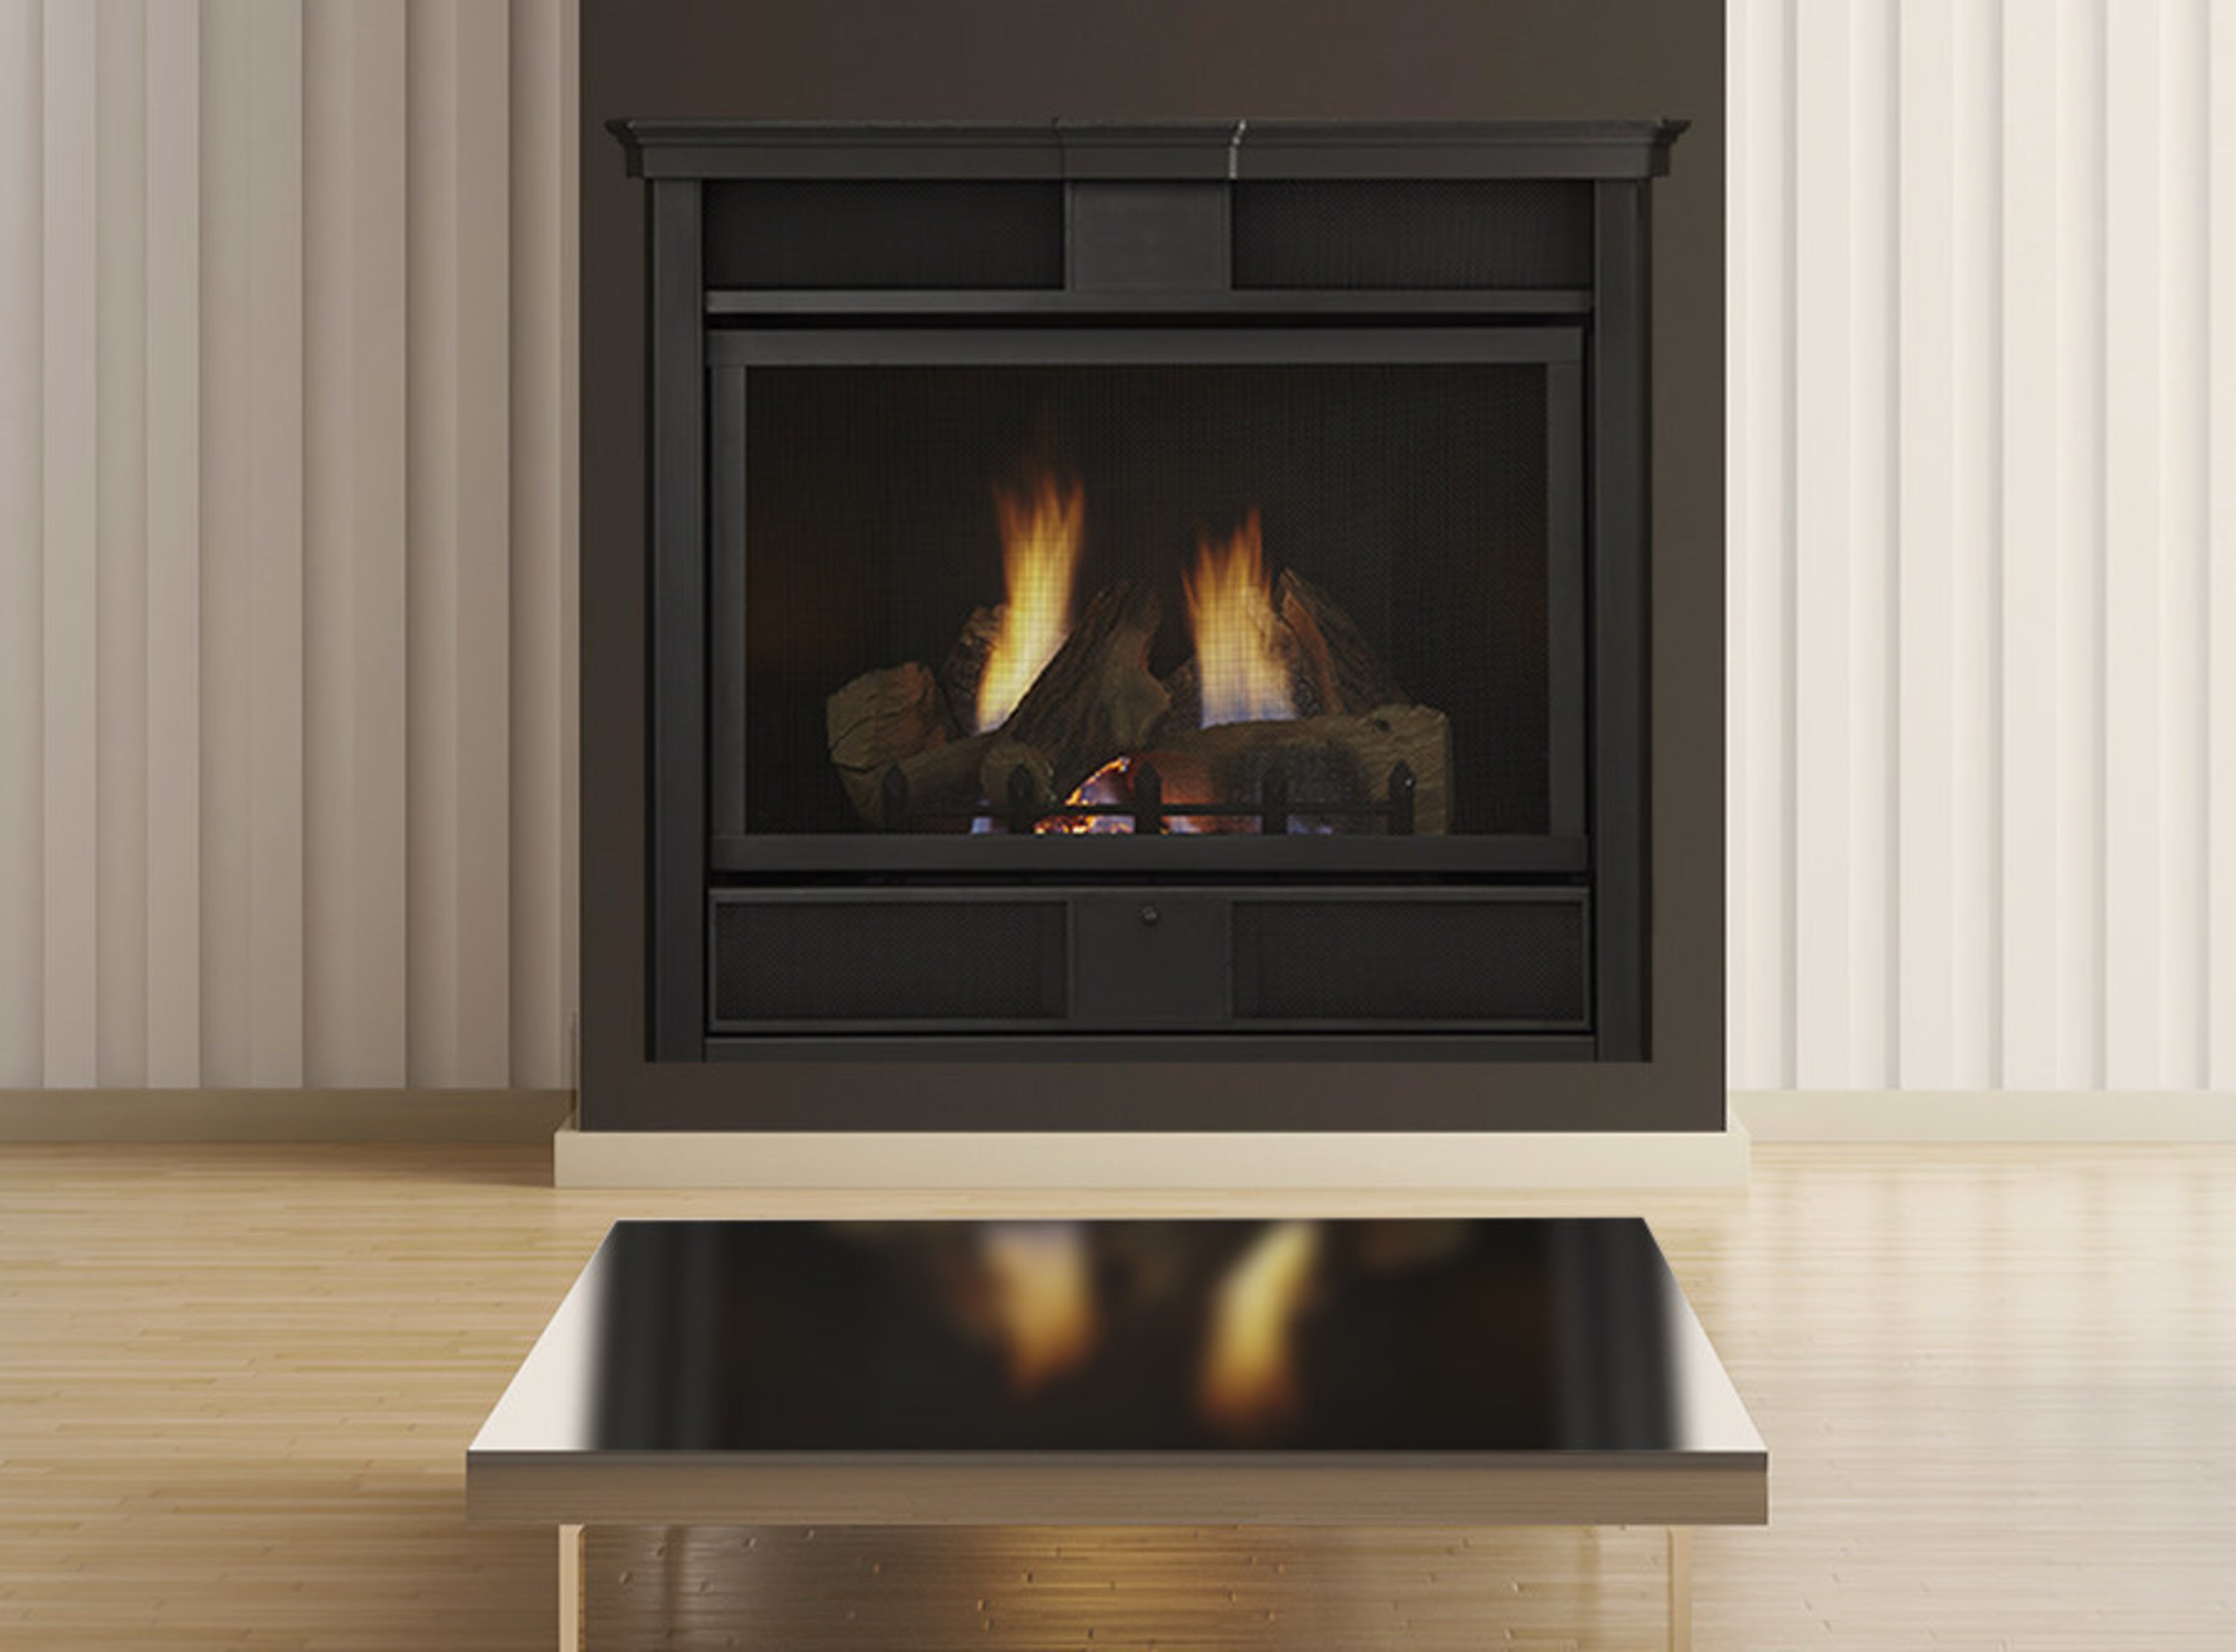 Compact and versatile, the Symphony vent free gas fireplace offers a slim, clean design with expansive views. Available in 24 and 32-inch sizes, it's easily customizable to blend with any decor.